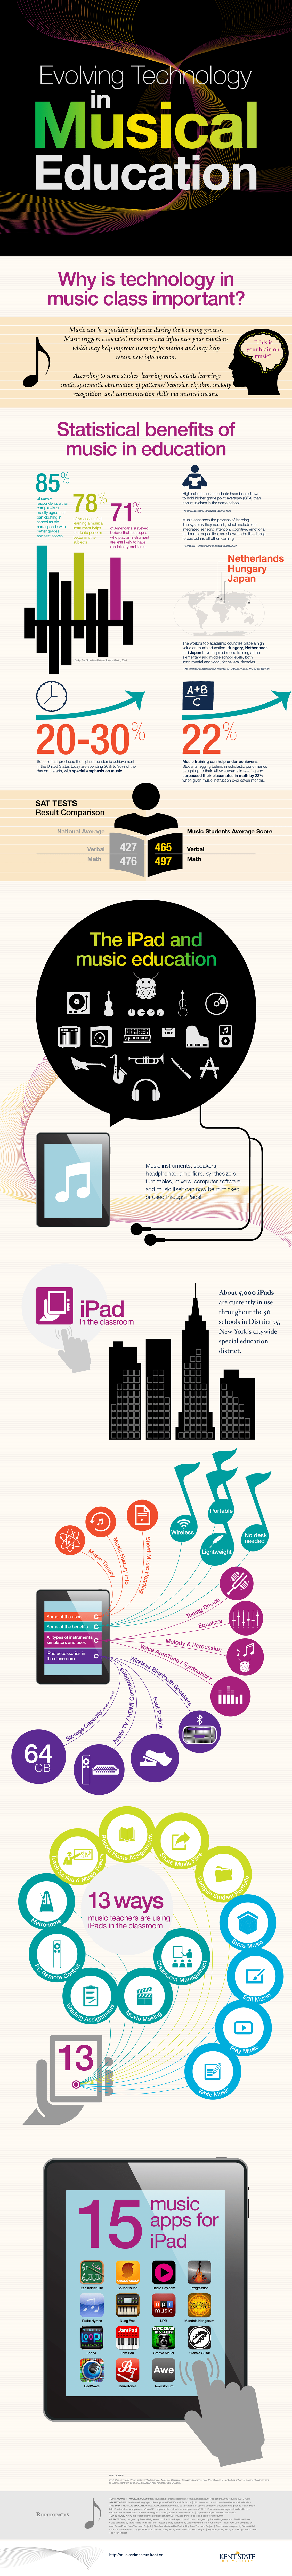 Educational Technology in Music Education Infographic